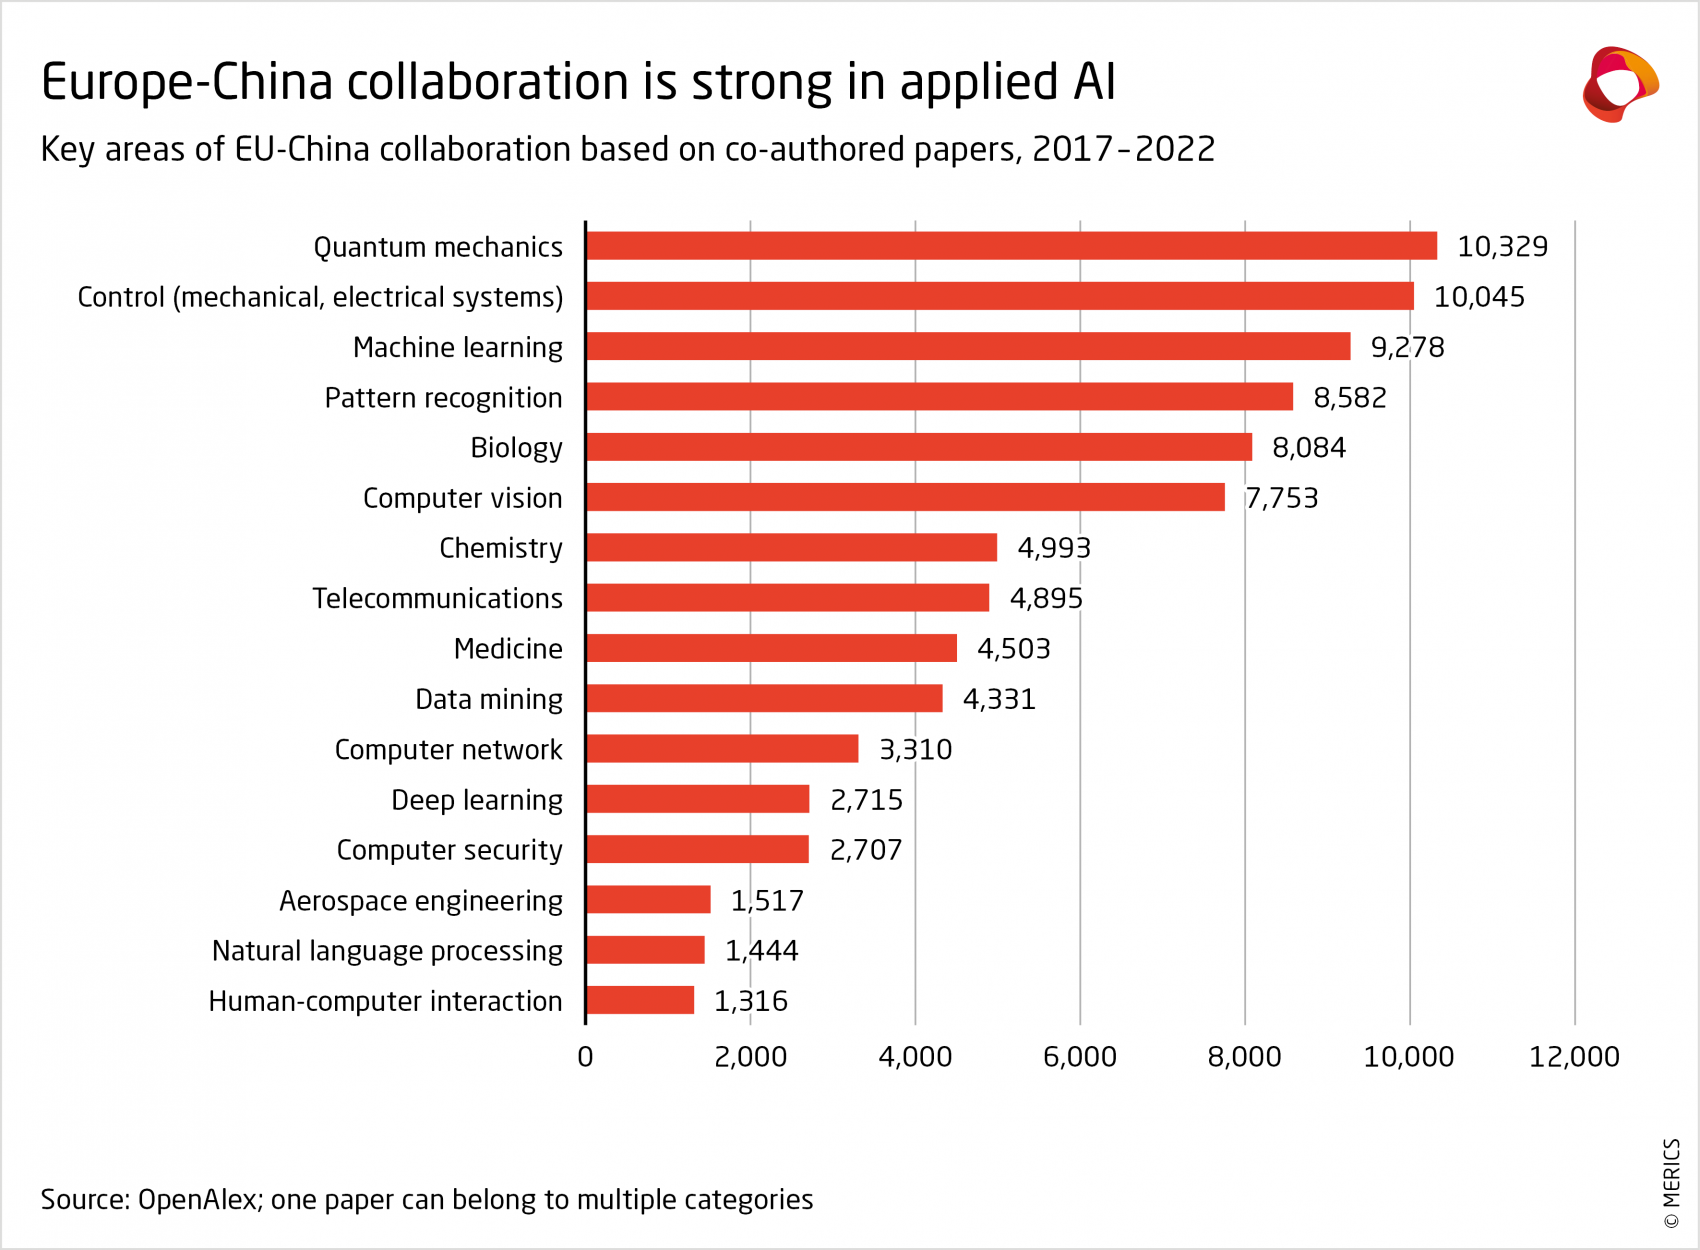 merics-ai-entanglement-europe-china-collaboration-is-strong-in-applied-ai-2017-2022.png